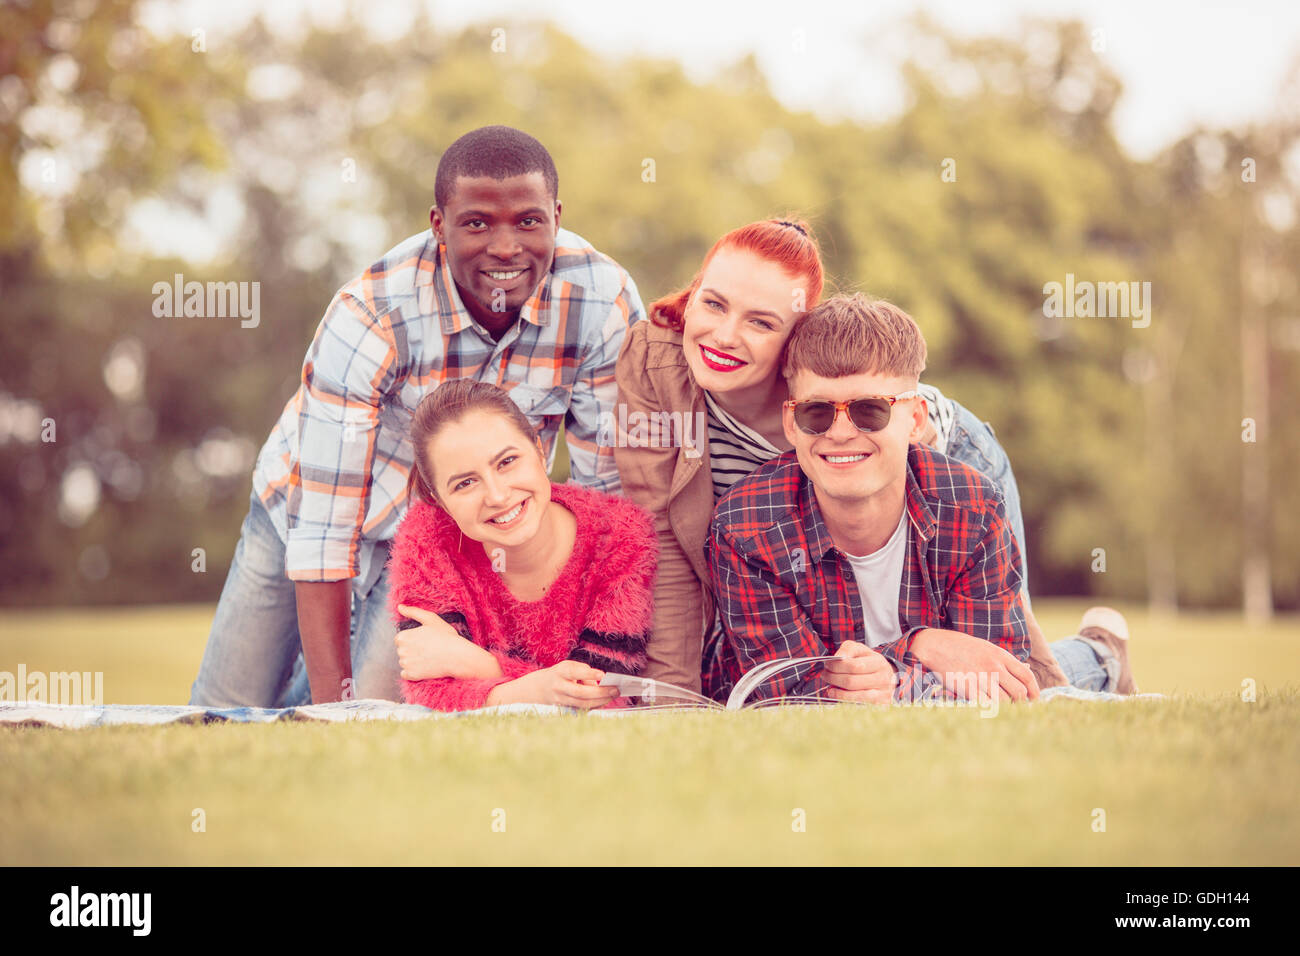 Friends hanging out, enjoying picnic - Stock Image - F020/2364 - Science  Photo Library